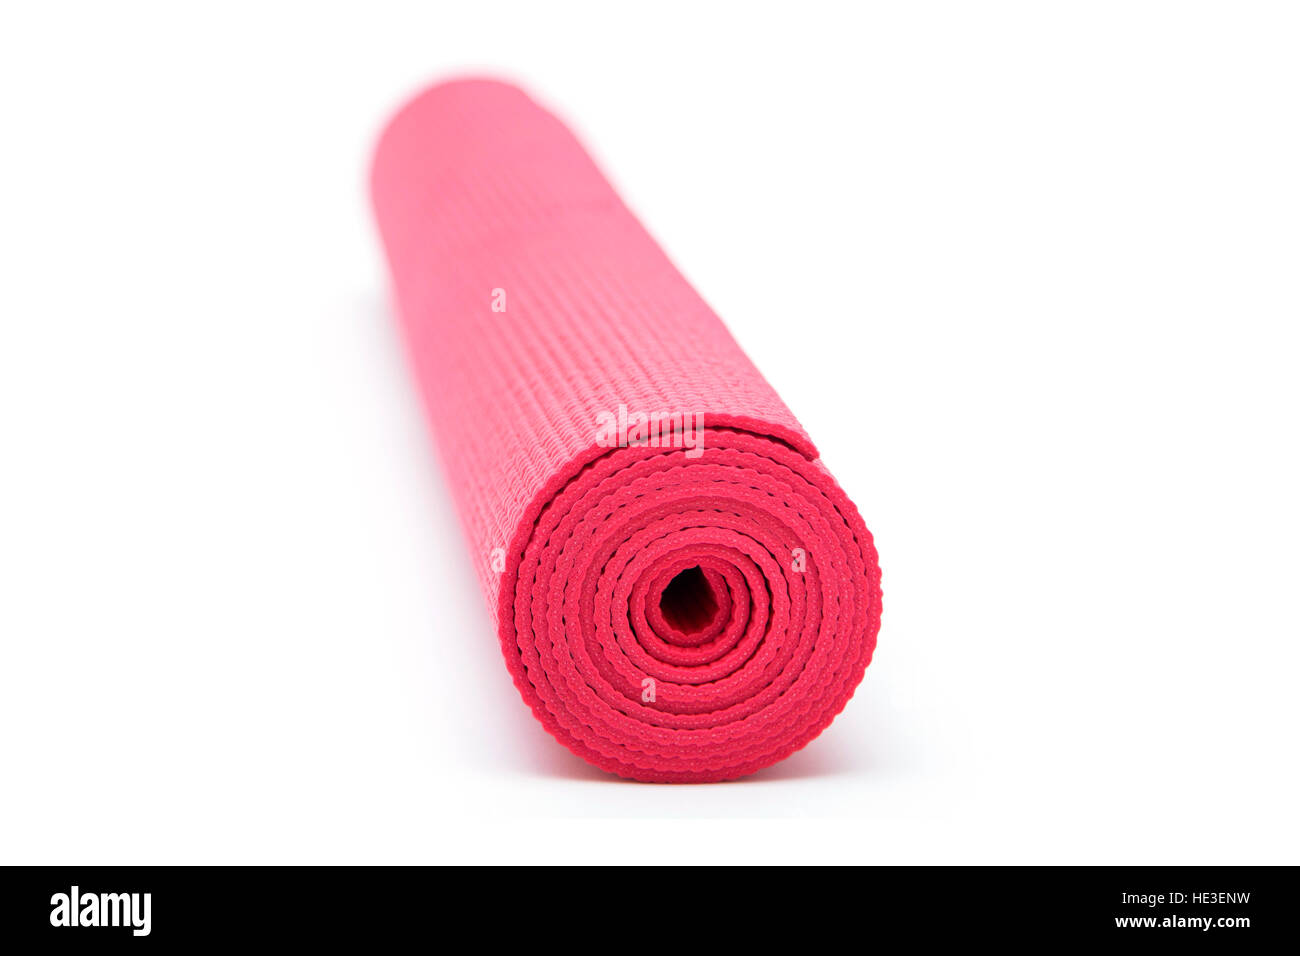 Close up view at exercise mats isolated on the white Stock Photo